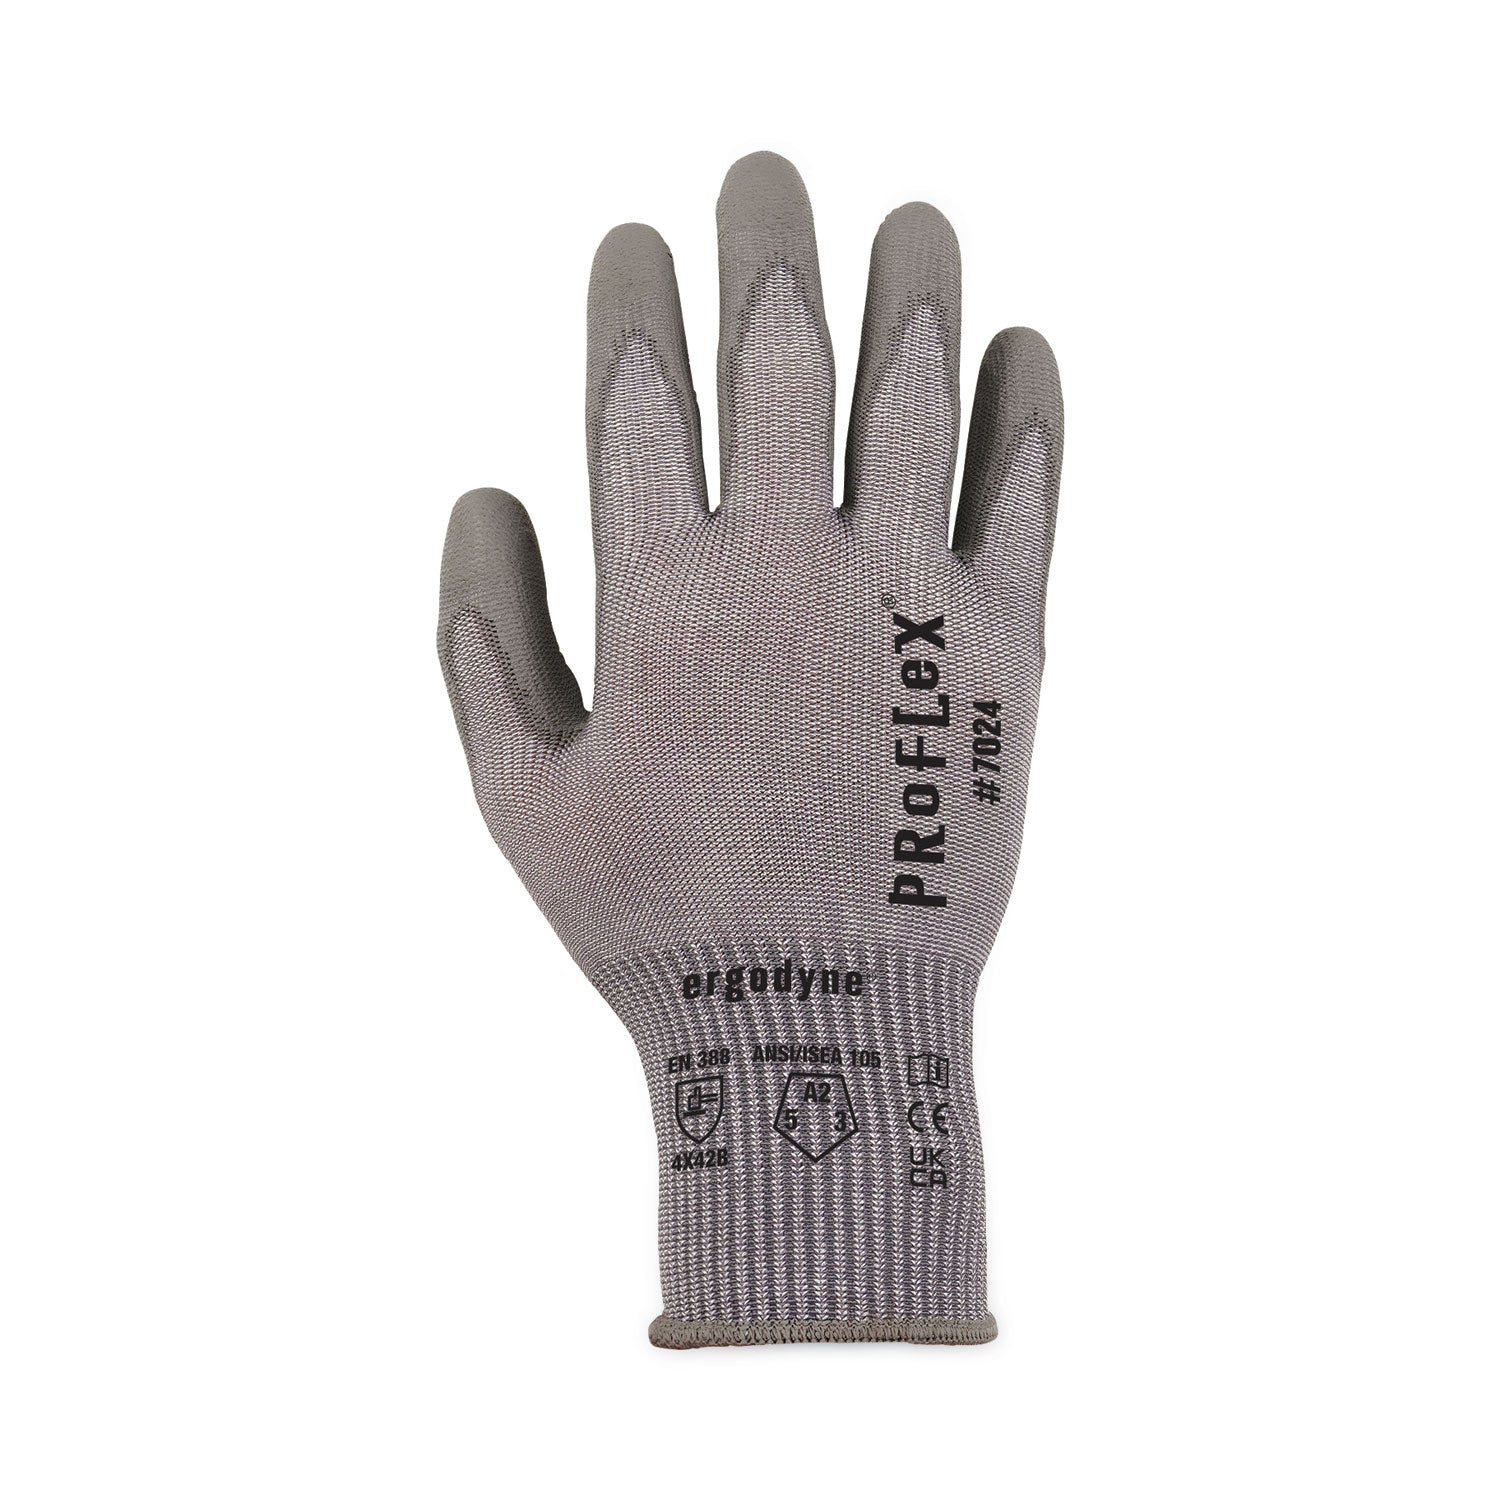 proflex-7024-ansi-a2-pu-coated-cr-gloves-gray-x-large-pair-ships-in-1-3-business-days_ego10405 - 2